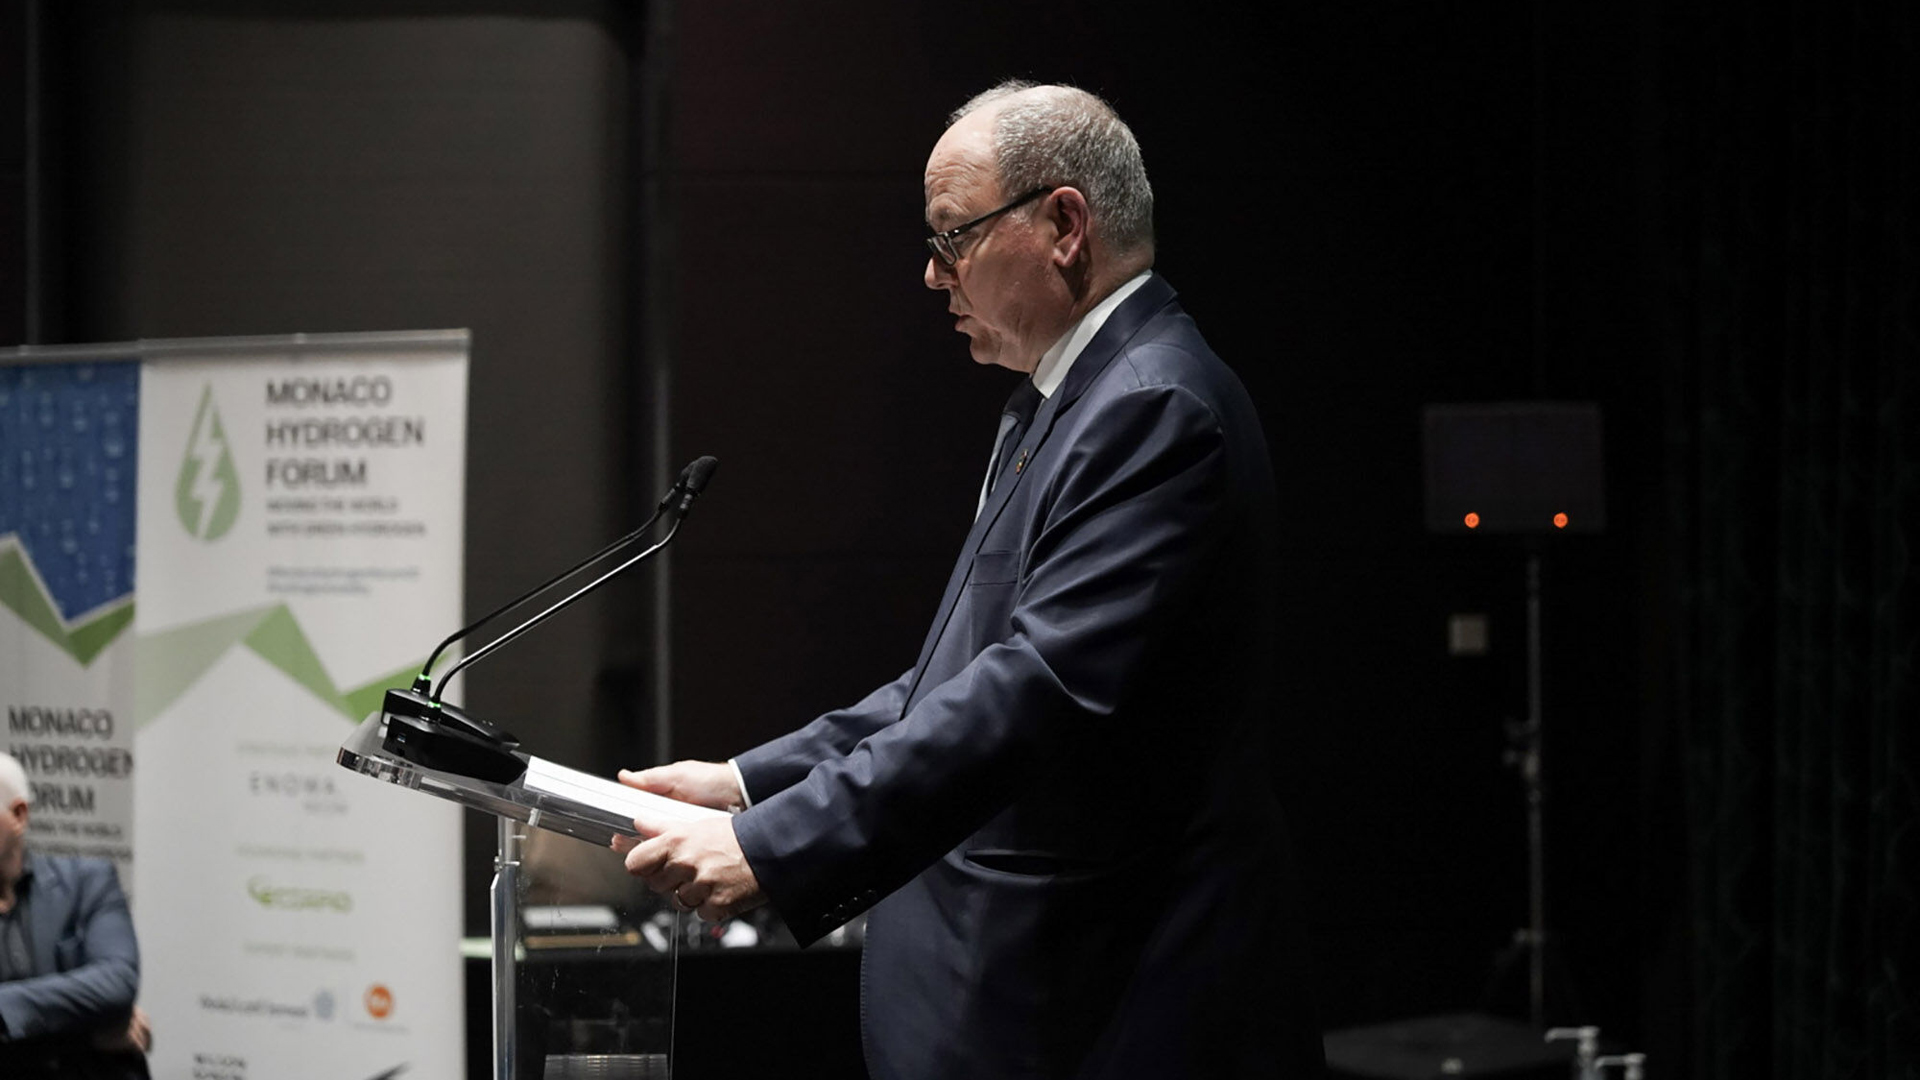 His Serene Highness Prince Albert II presents the Monaco Prize for Innovation in Renewable Hydrogen and Transportation